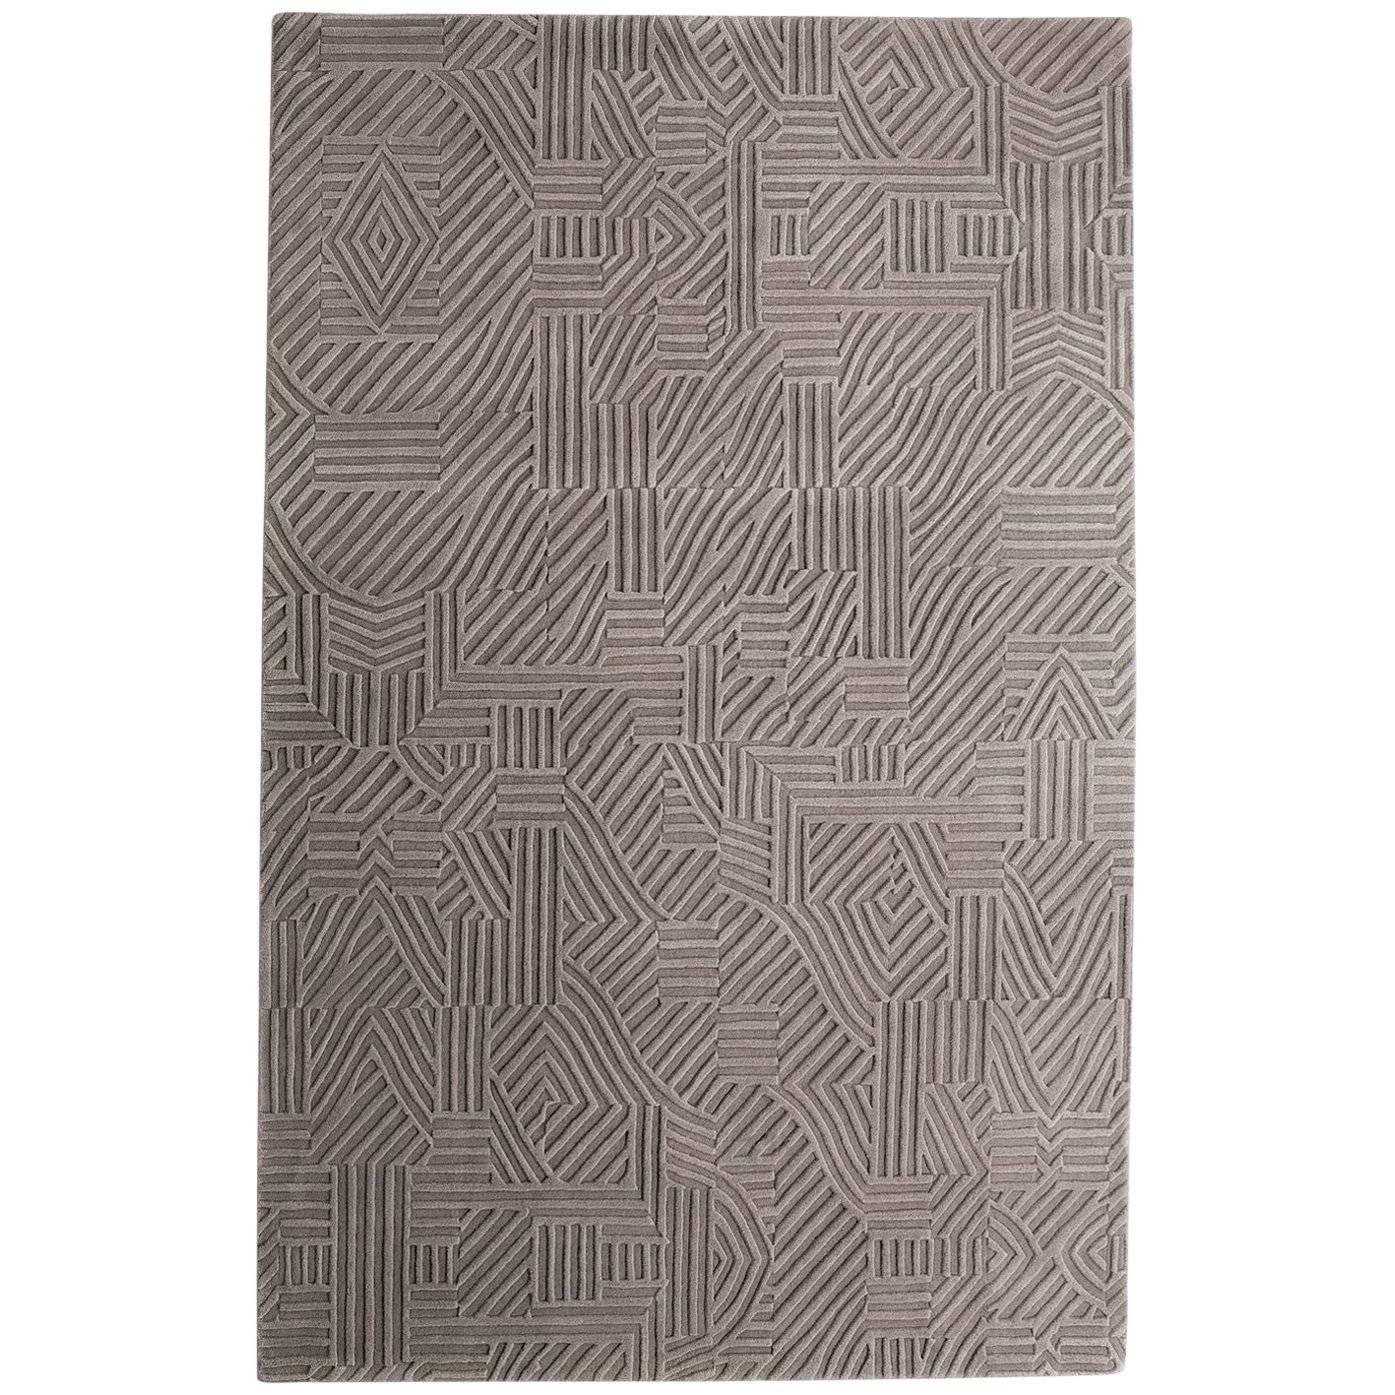 African Pattern 1 Area Rug in Hand-Tufted Wool by Milton Glaser, Small